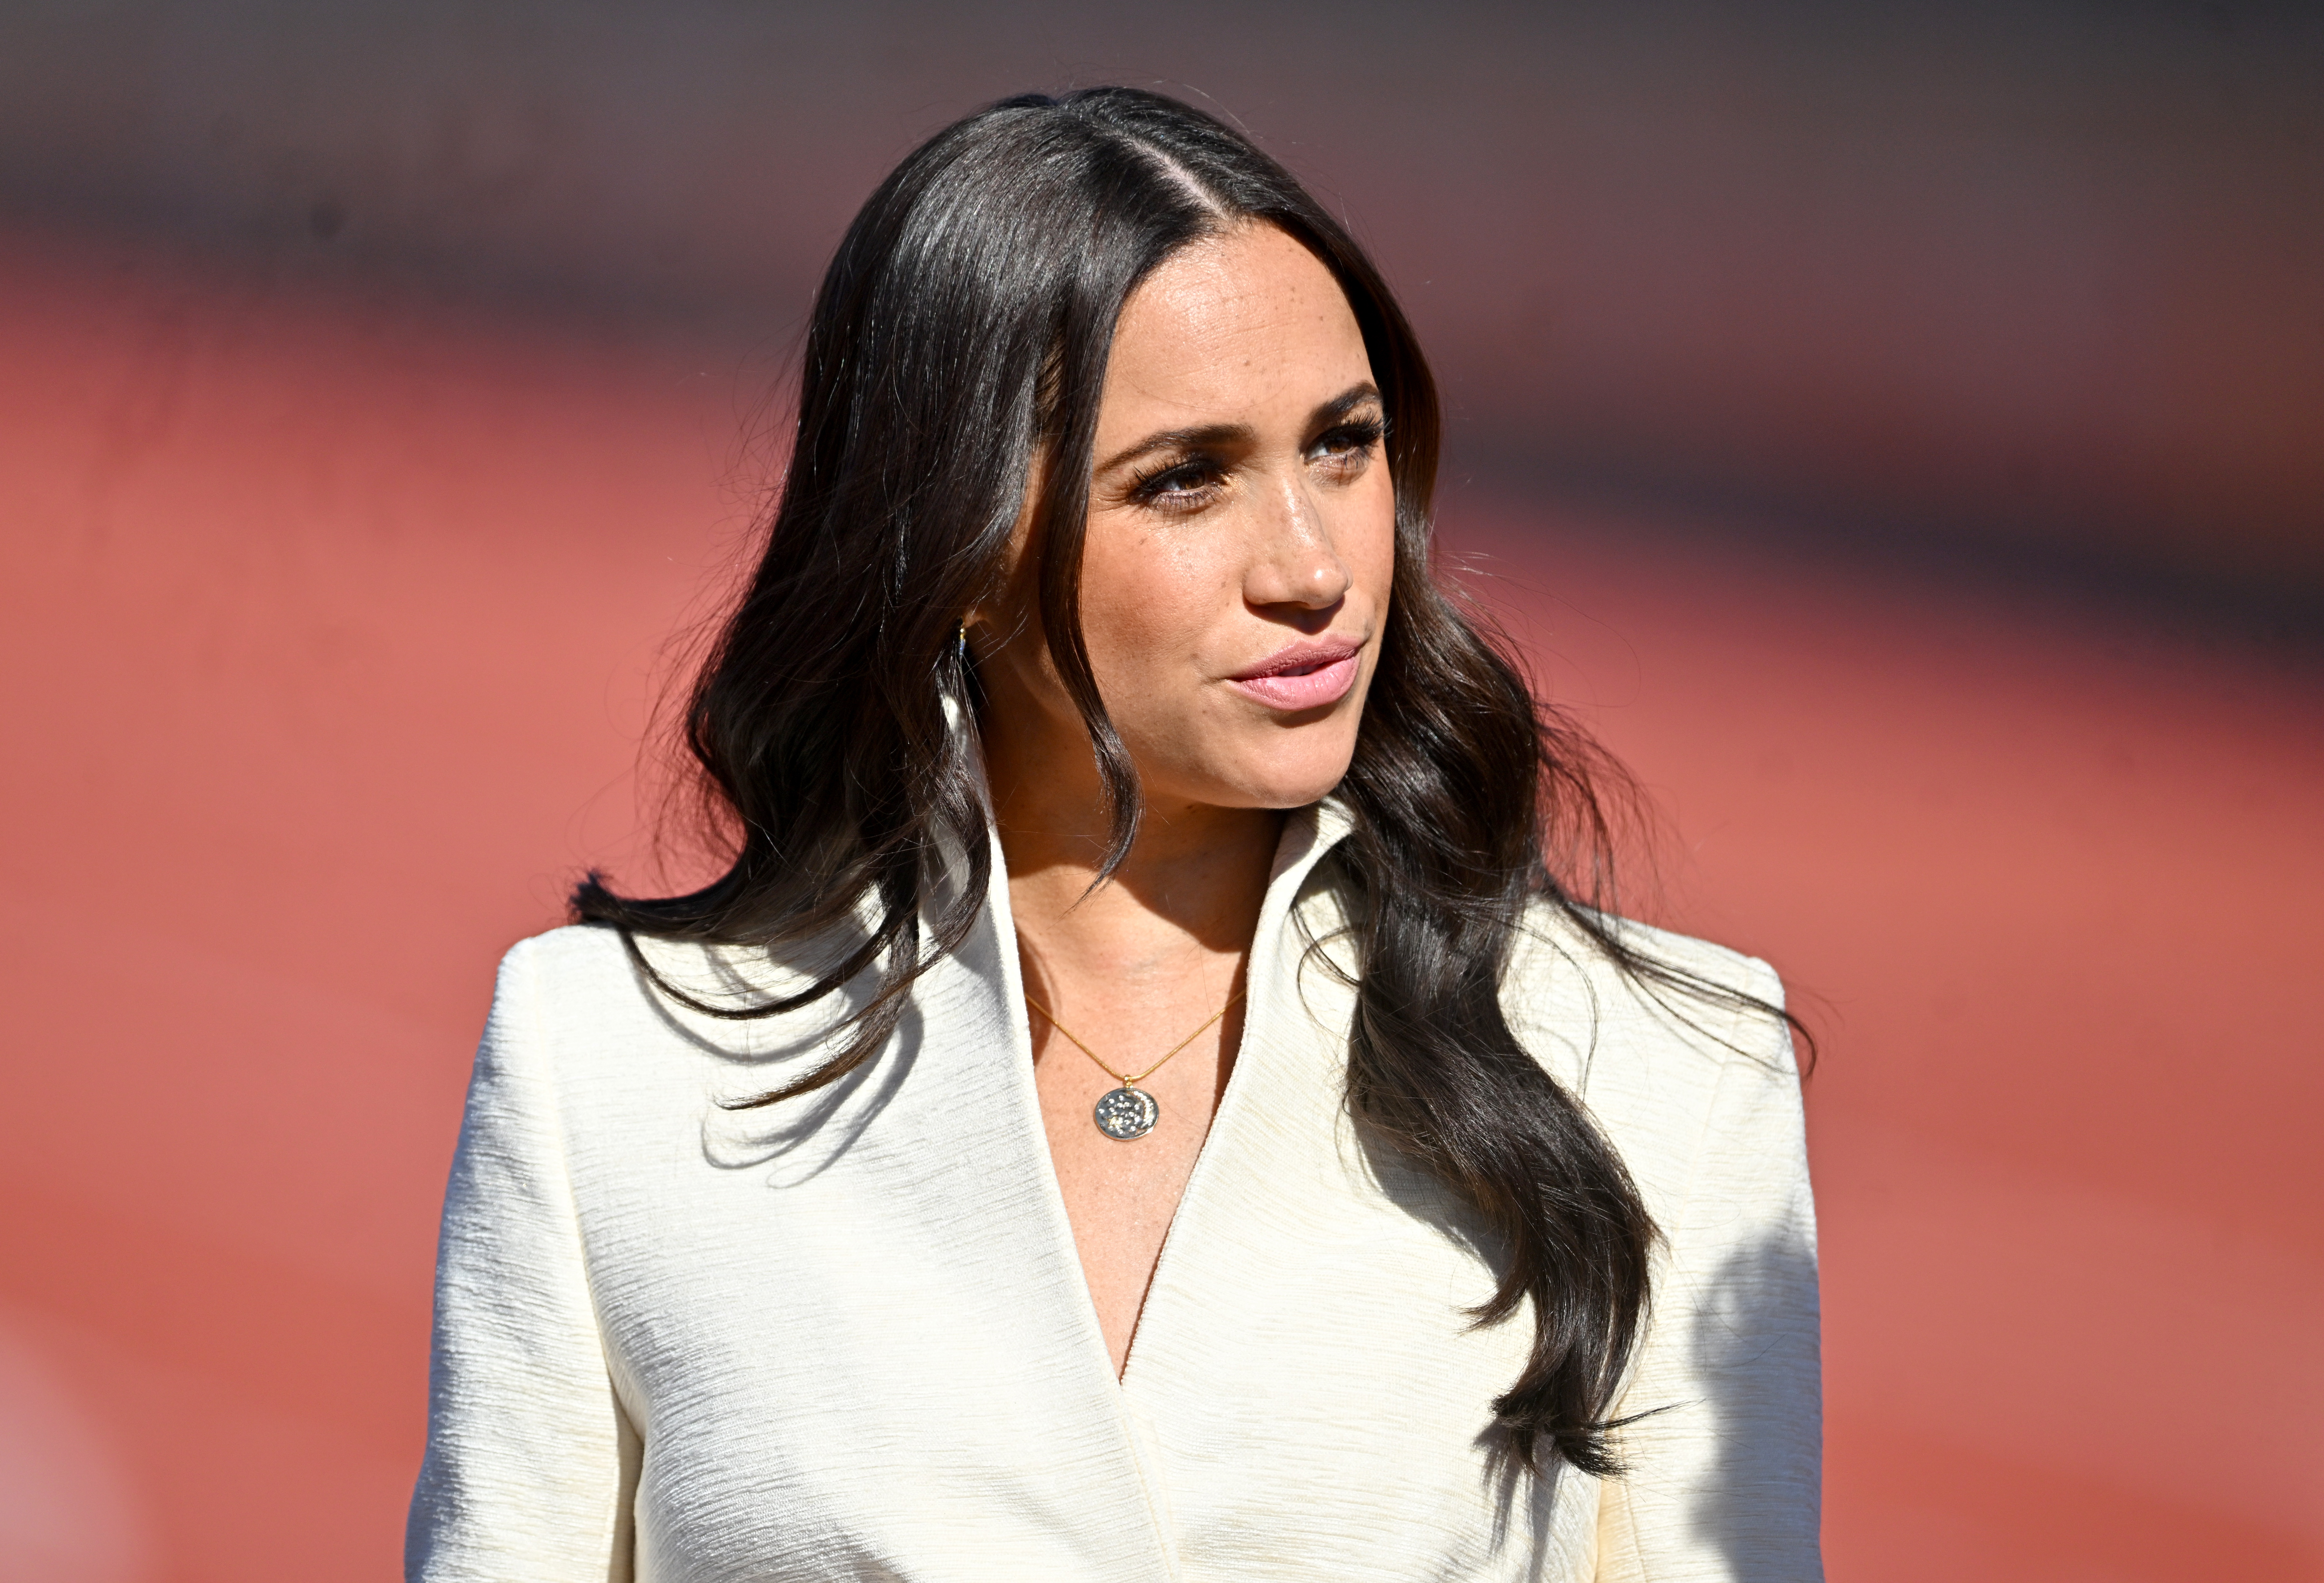 Meghan Markle at day two of the Invictus Games 2020 at Zuiderpark on April 17, 2022 in The Hague, Netherlands | Source: Getty Images